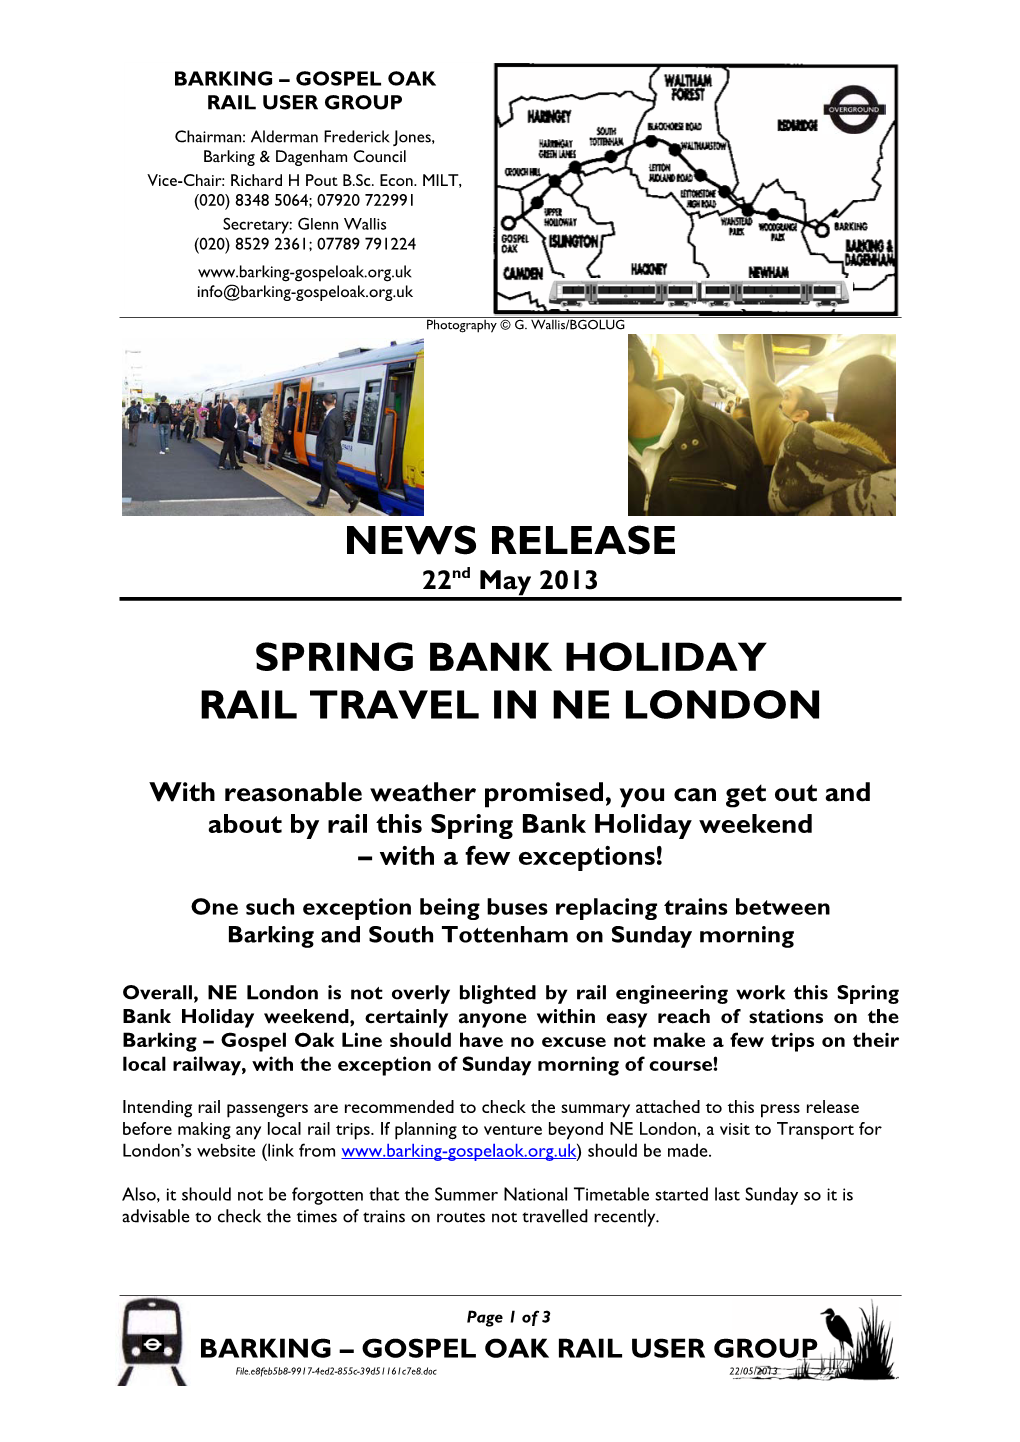 News Release Spring Bank Holiday Rail Travel in Ne London